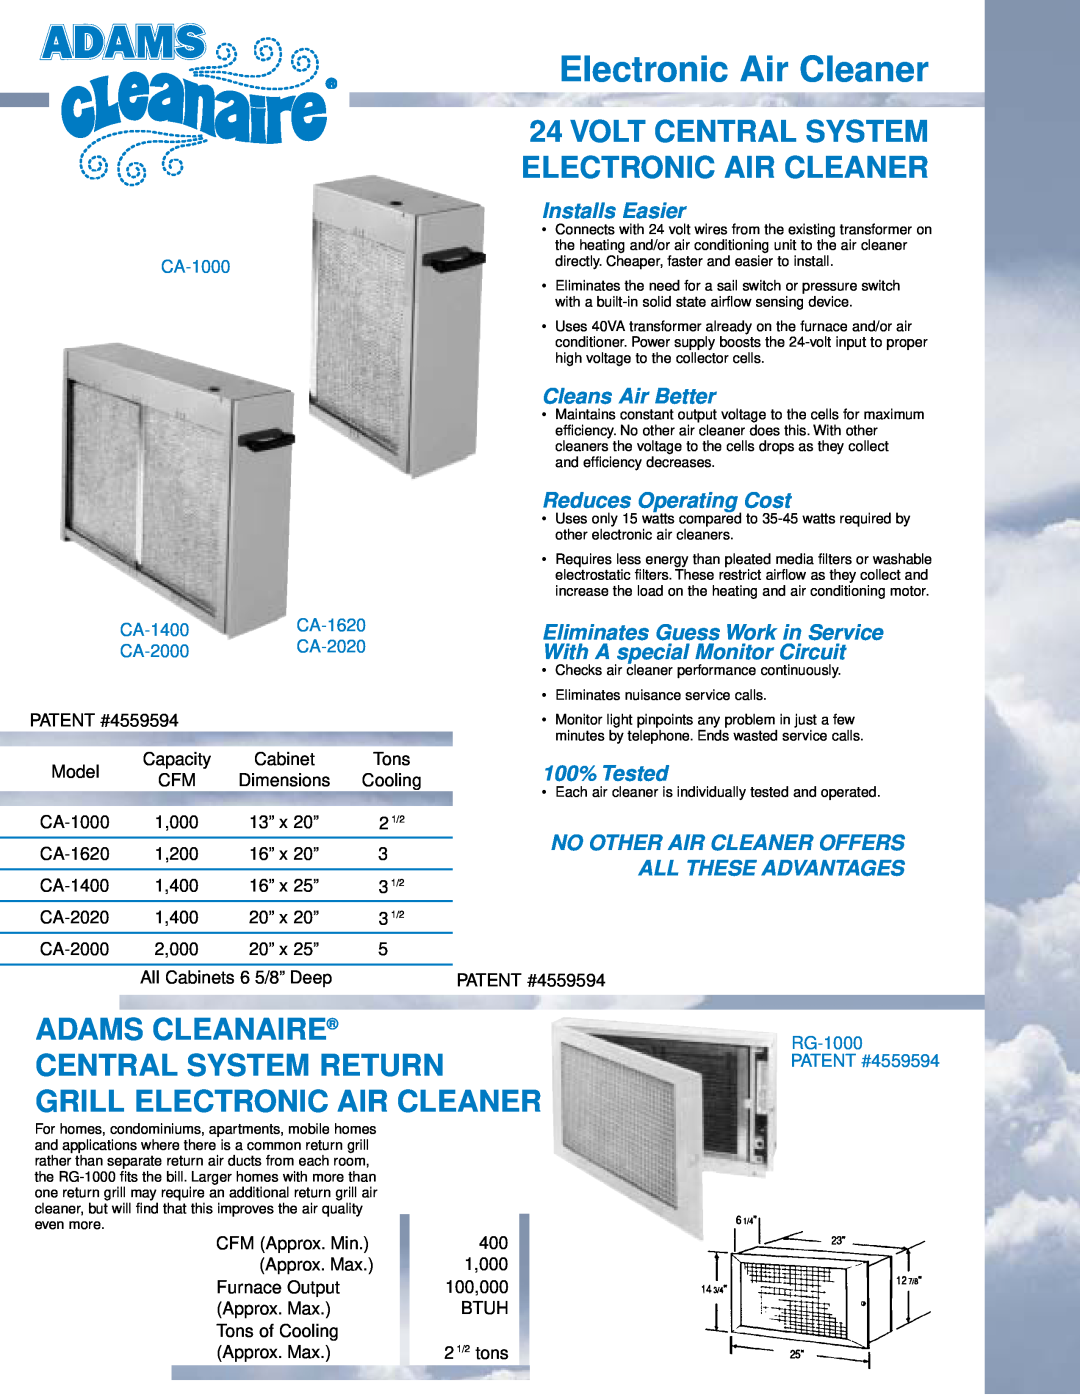 Adams Cleanaire Volt Central System Electronic Air Cleaner, Installs Easier, Cleans Air Better, Reduces Operating Cost 